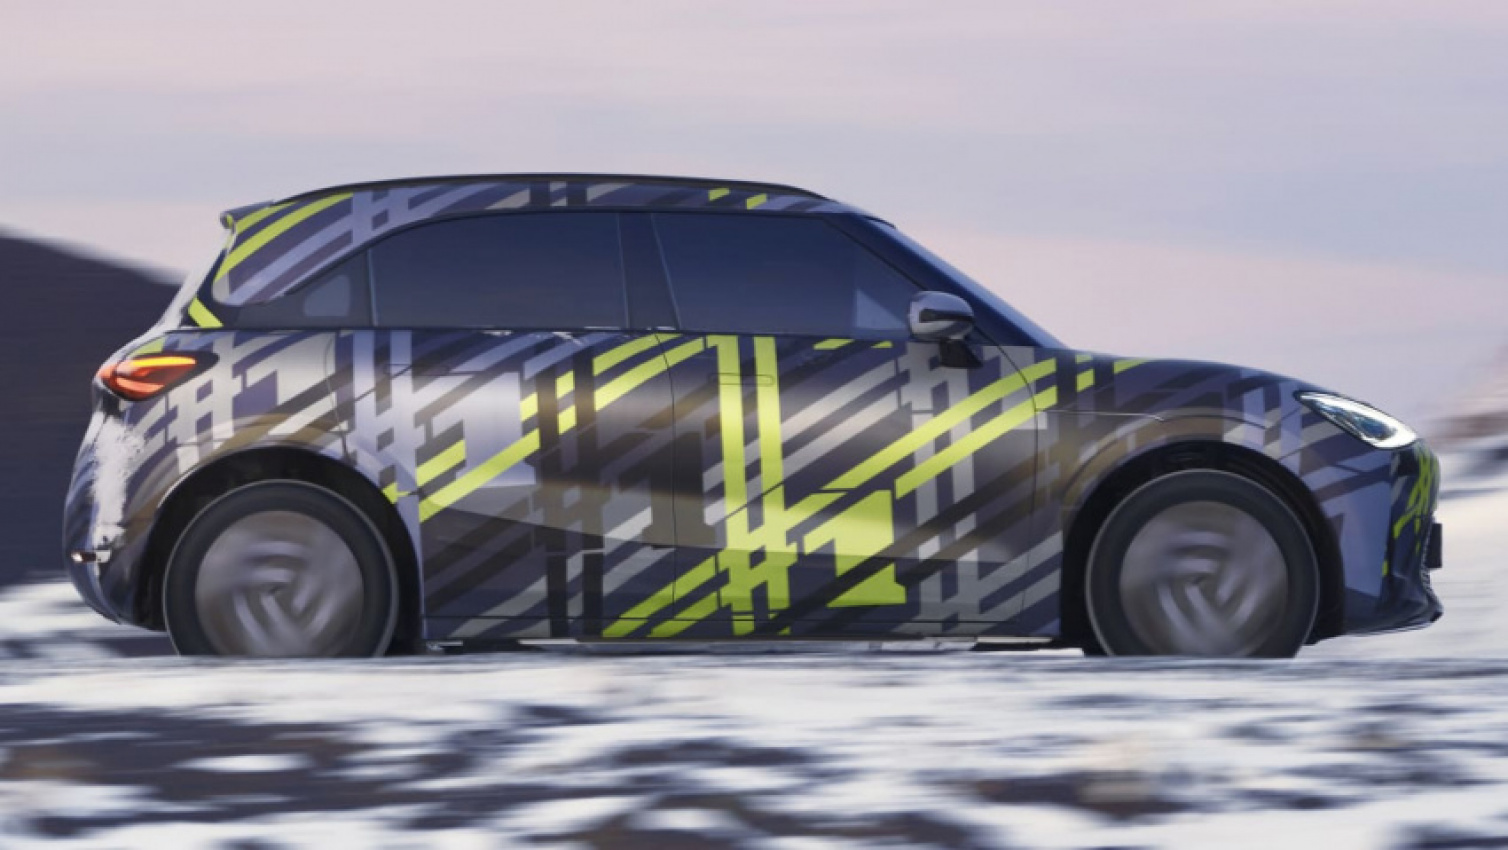 autos, cars, reviews, smart, electric cars, small suvs, new 2022 electric smart #1 suv teased in new images